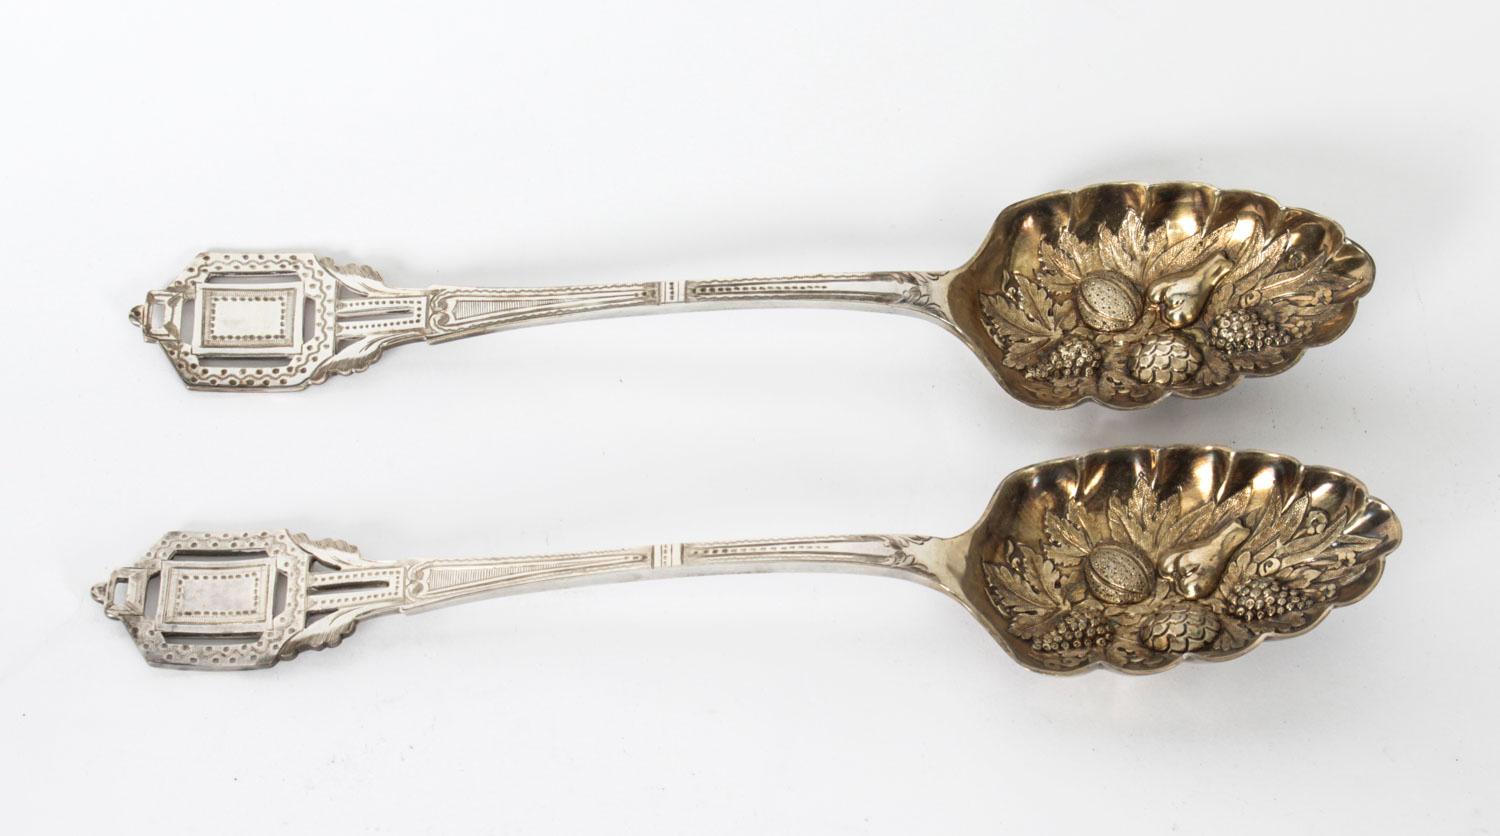 This is a lovely antique Victorian cased silver plated pair of Berry serving spoons C 1860 in date.
 
The spoons have cast stylised handles with gilt hand-chased bowls decorated with fruit, housed in their original black leather case with fitted